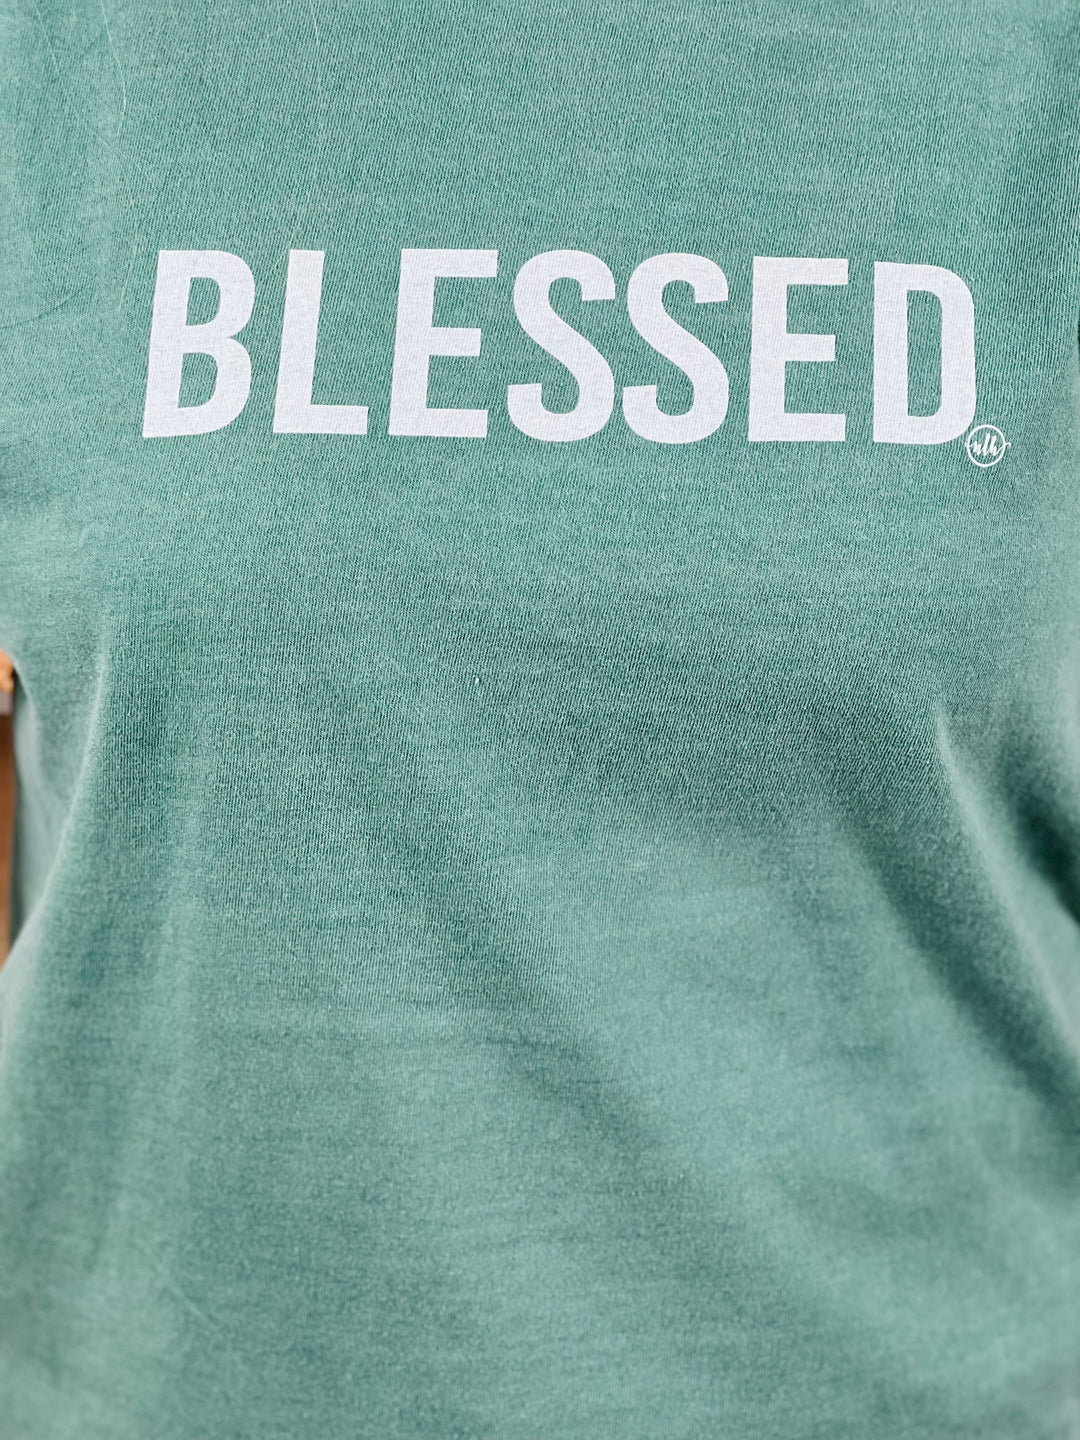 "Blessed" Graphic Tee